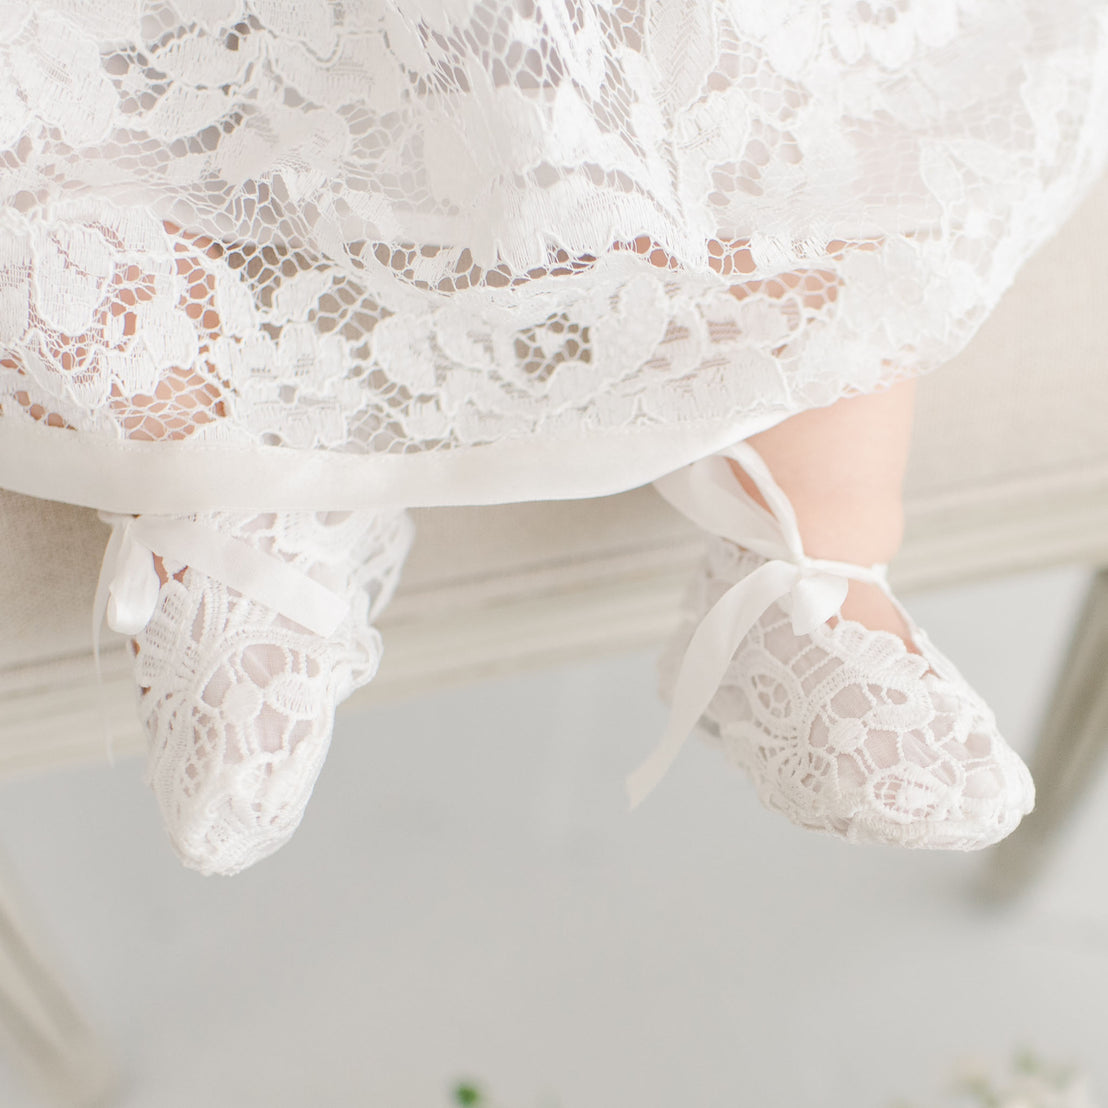 Close-up of a baby's feet wearing Rose Booties, tied with satin ribbons, with the edge of an heirloom lace dress visible. The background is subtly blurred.